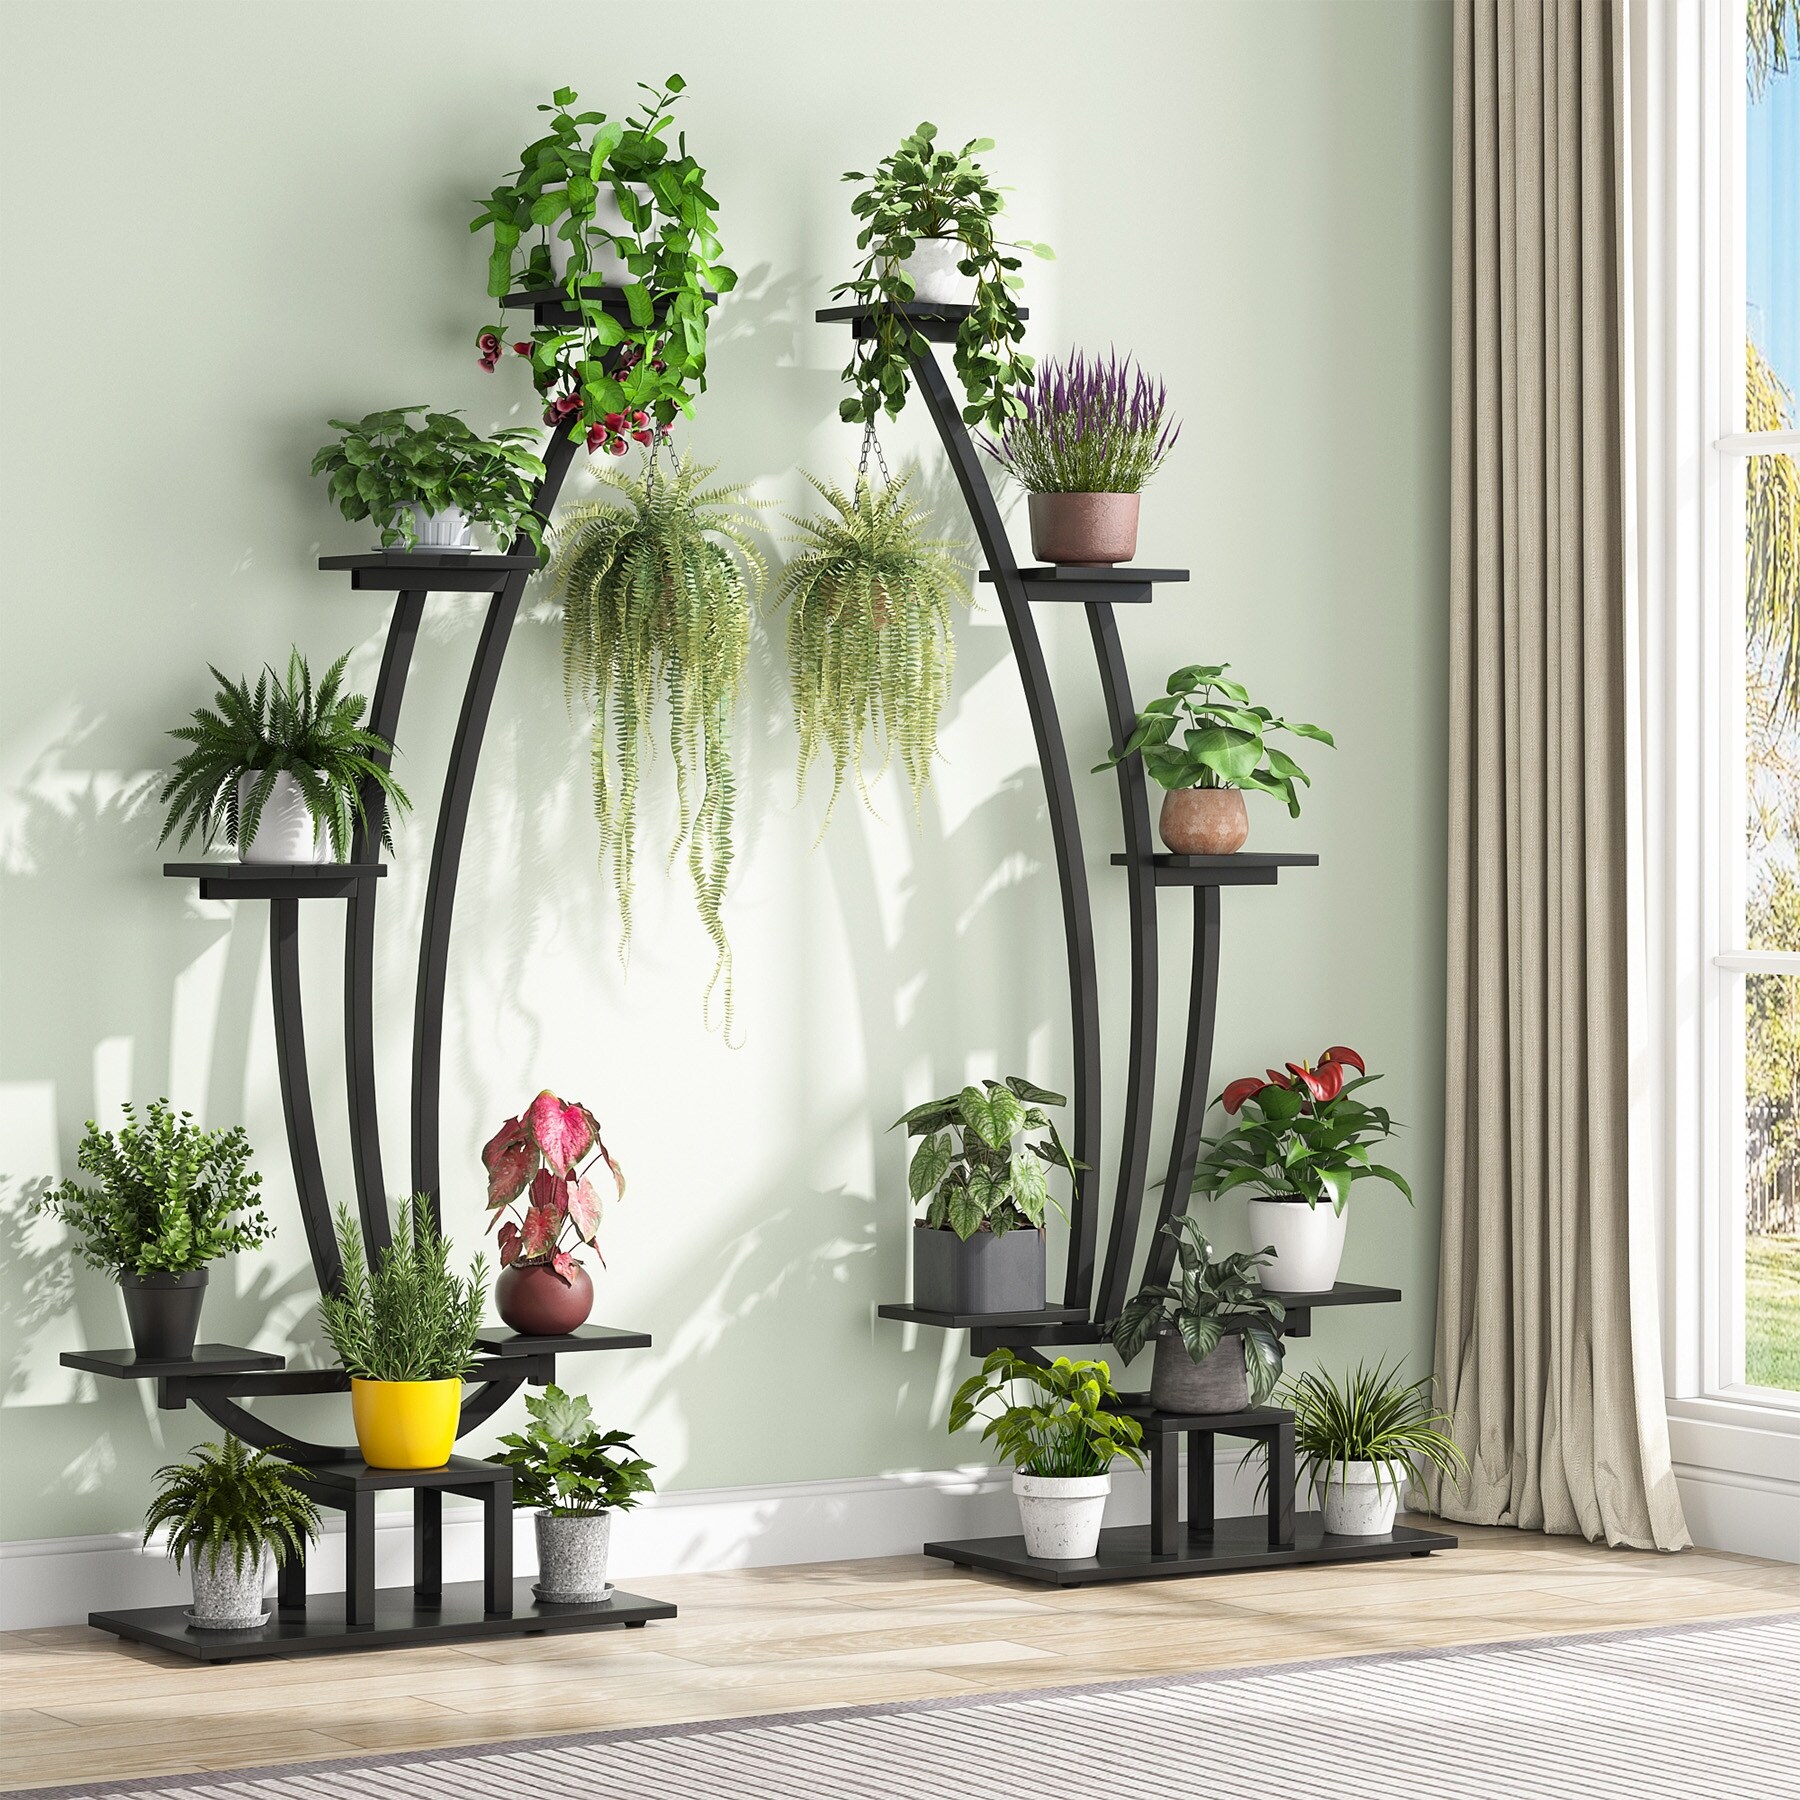 https://ak1.ostkcdn.com/images/products/is/images/direct/9adf82311af027b4670d17e2b6d9e14255efe2e1/Indoor-Plant-Stand-Pack-of-2%2C-6-Tier-Flower-Rack-for-Home-Garden.jpg